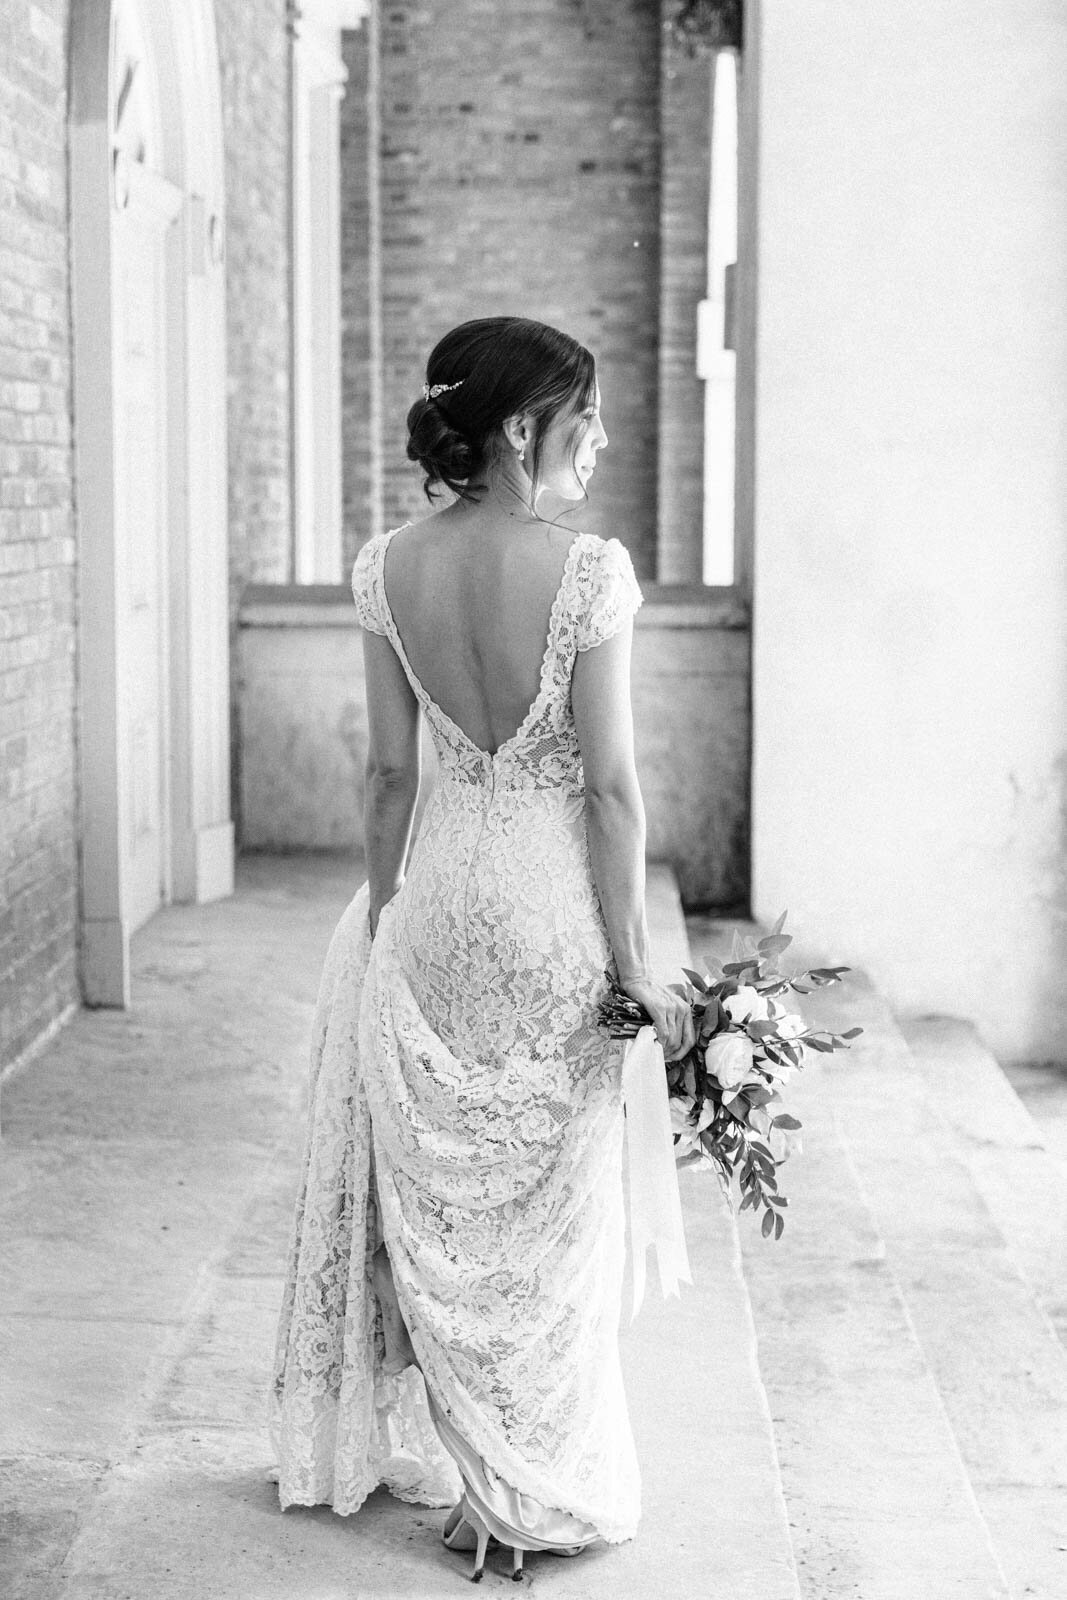 Beautiful bridal portrait in black and white